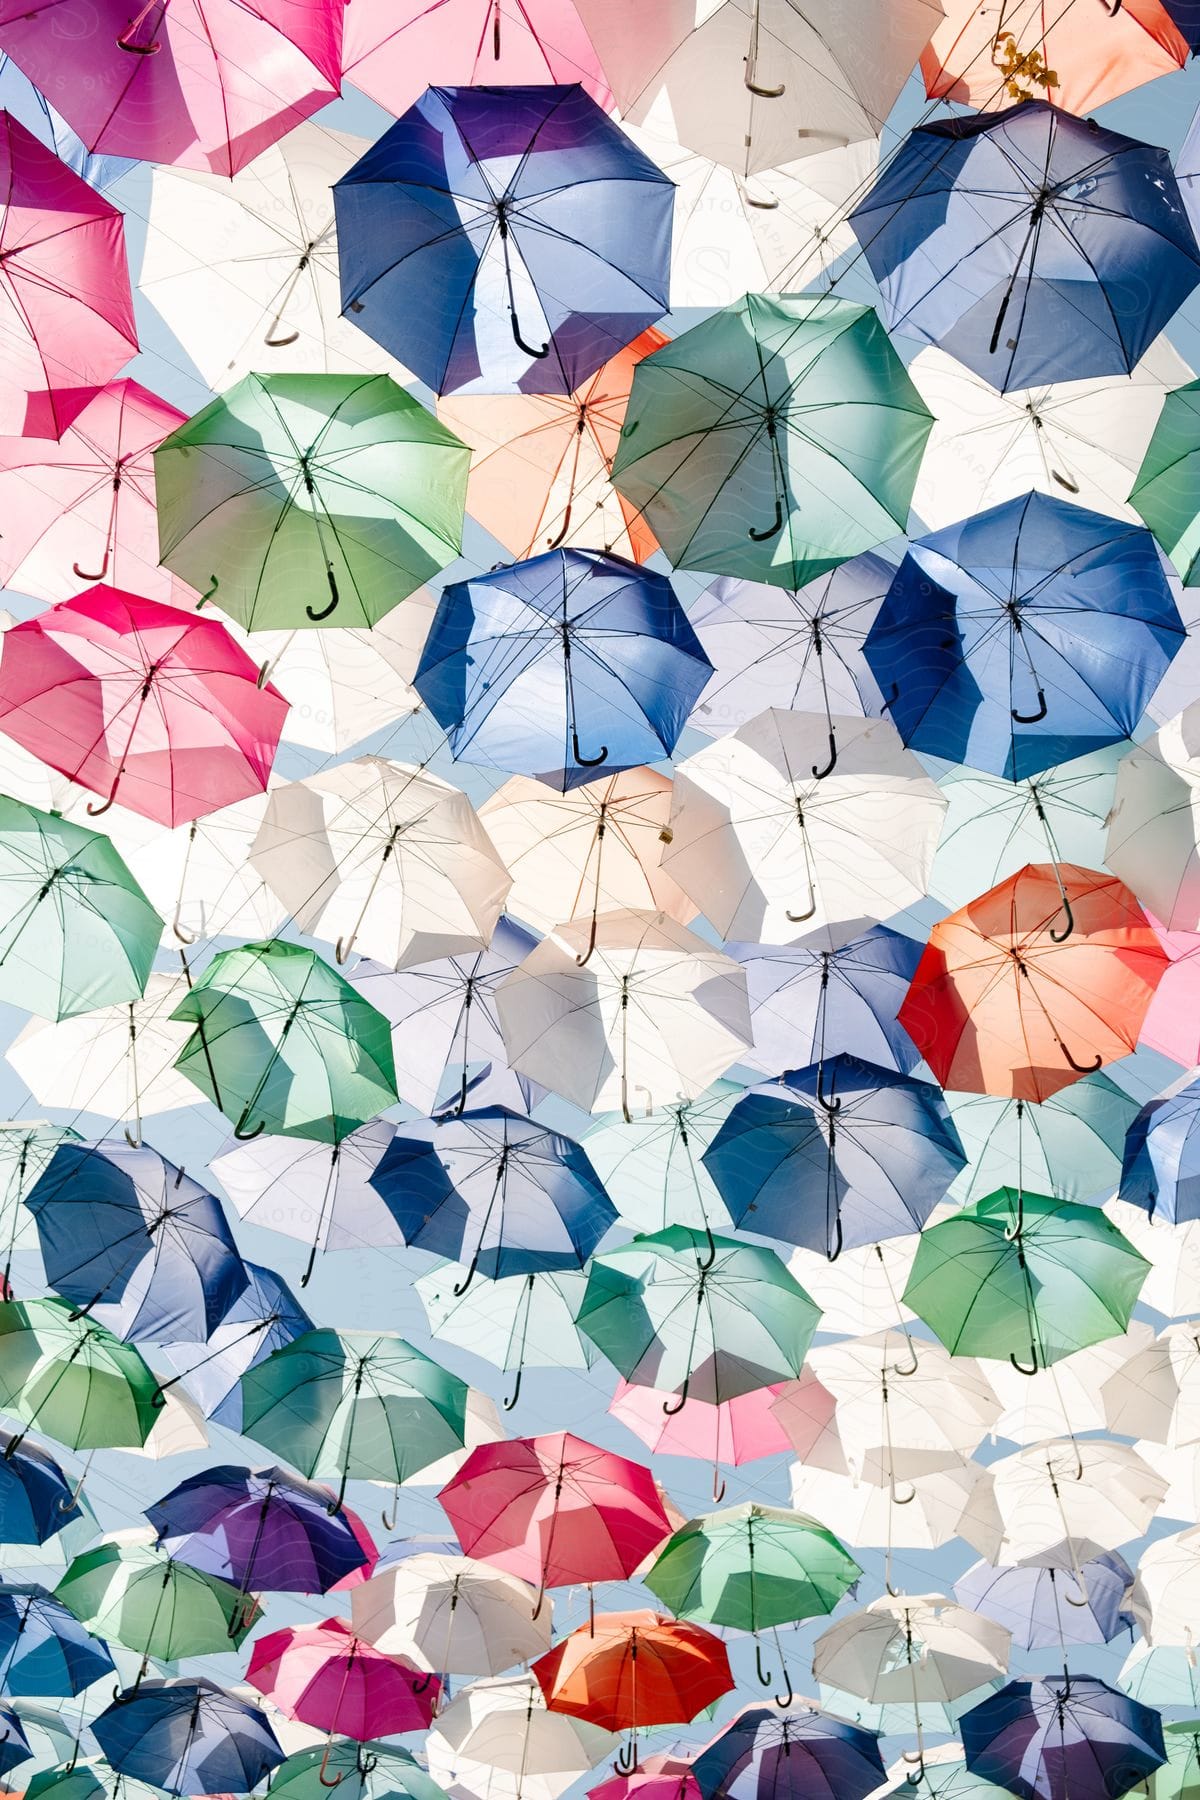 Colorful umbrellas suspended in the air